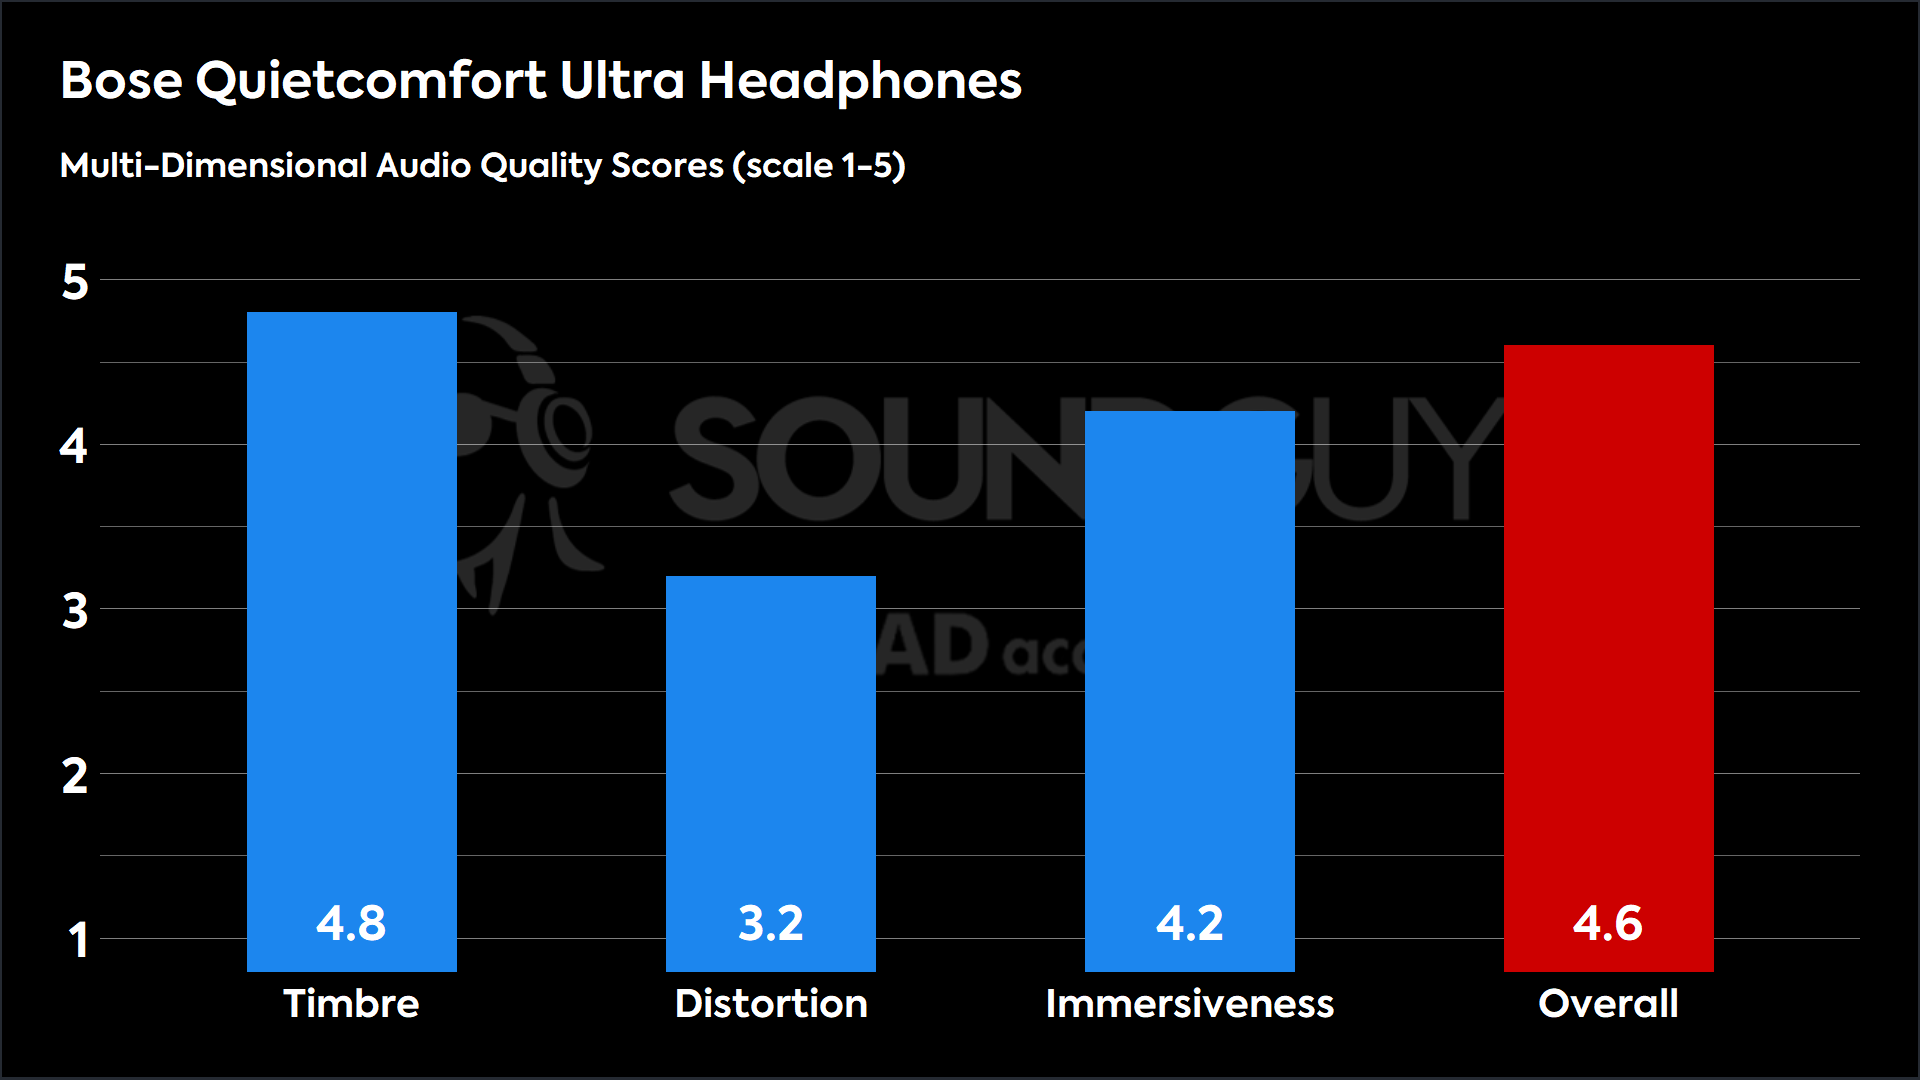 The Bose Quietcomfort Ultra Headphones have excellent sound quality for most, as reflected by MDAQS.